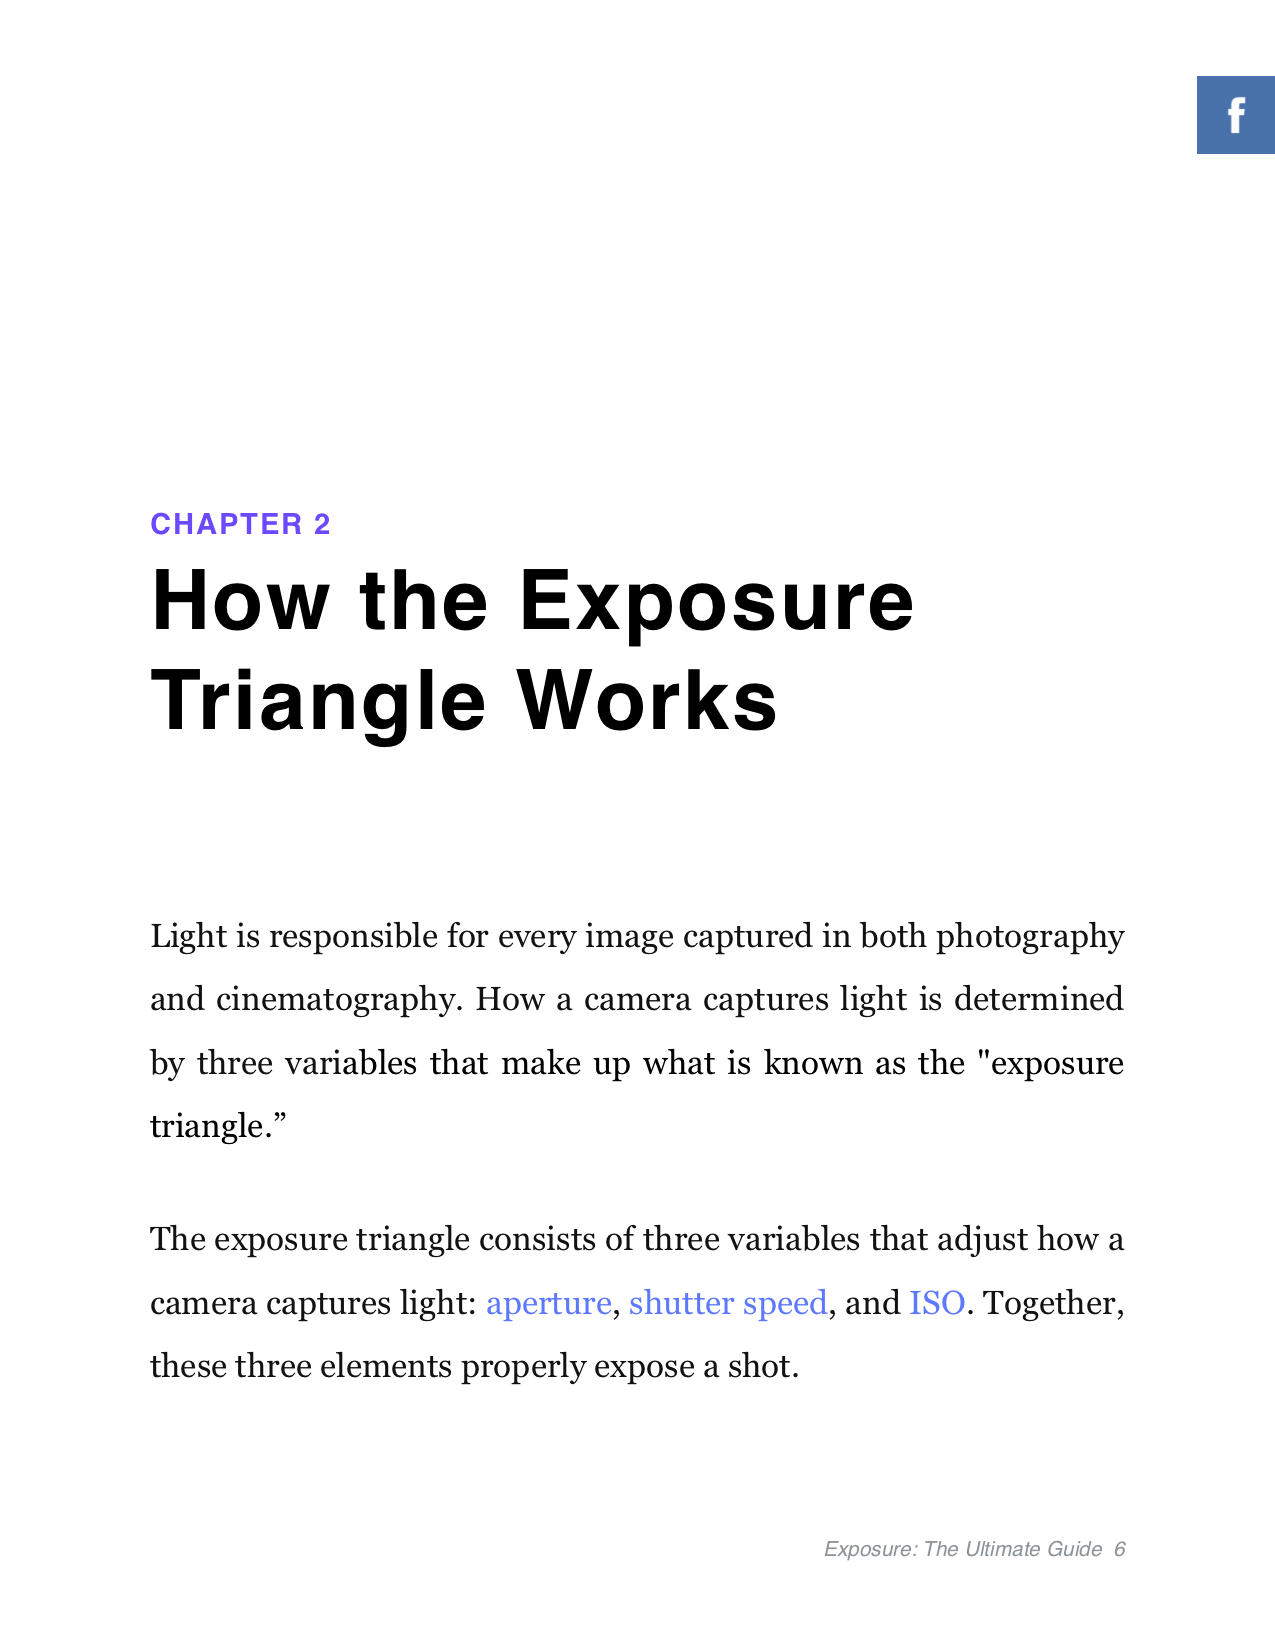 Exposure Triangle Ebook - The Ultimate Guide - Chapter - How Exposure Triangle Works